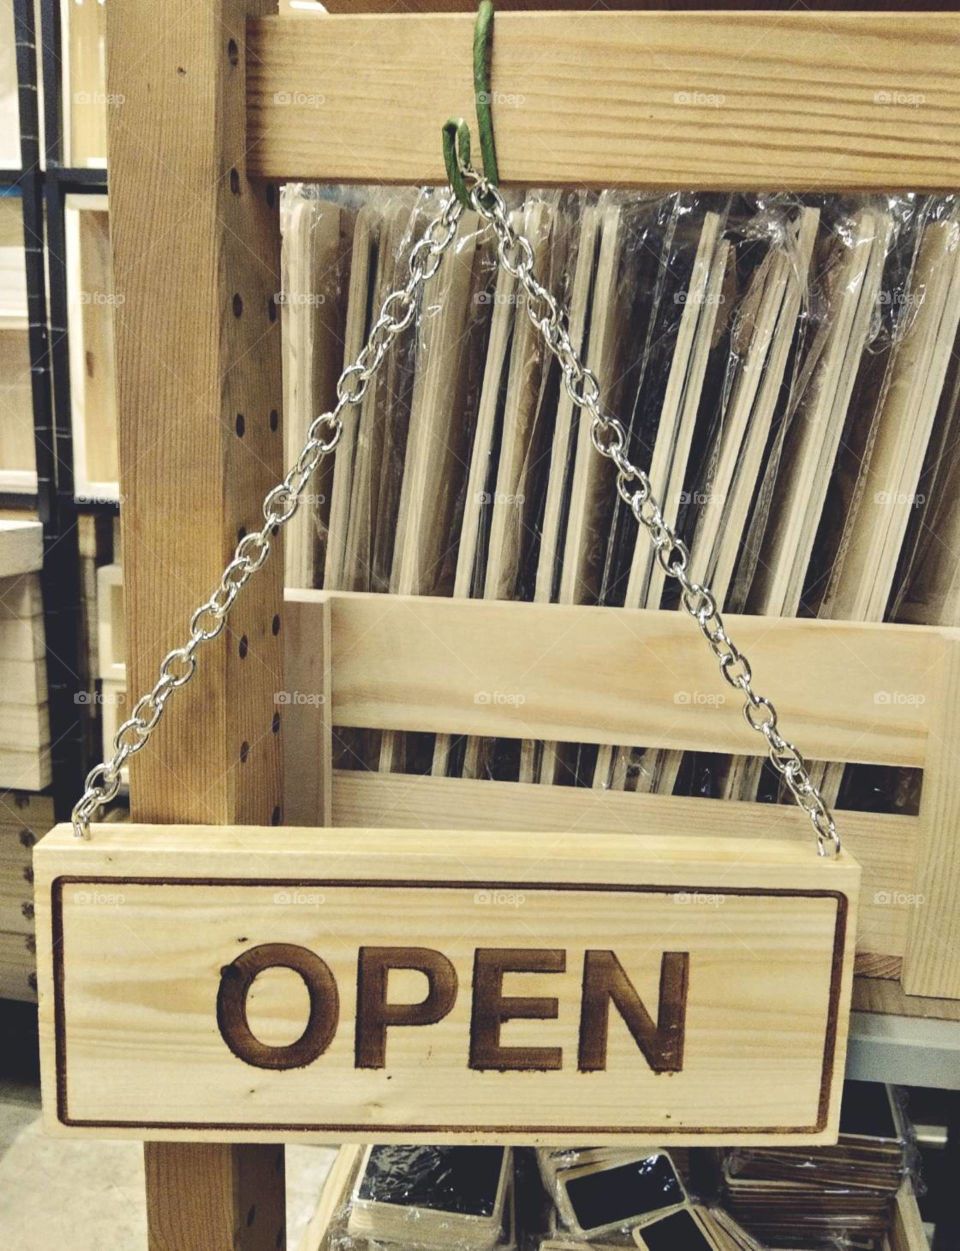 Open wood sign.